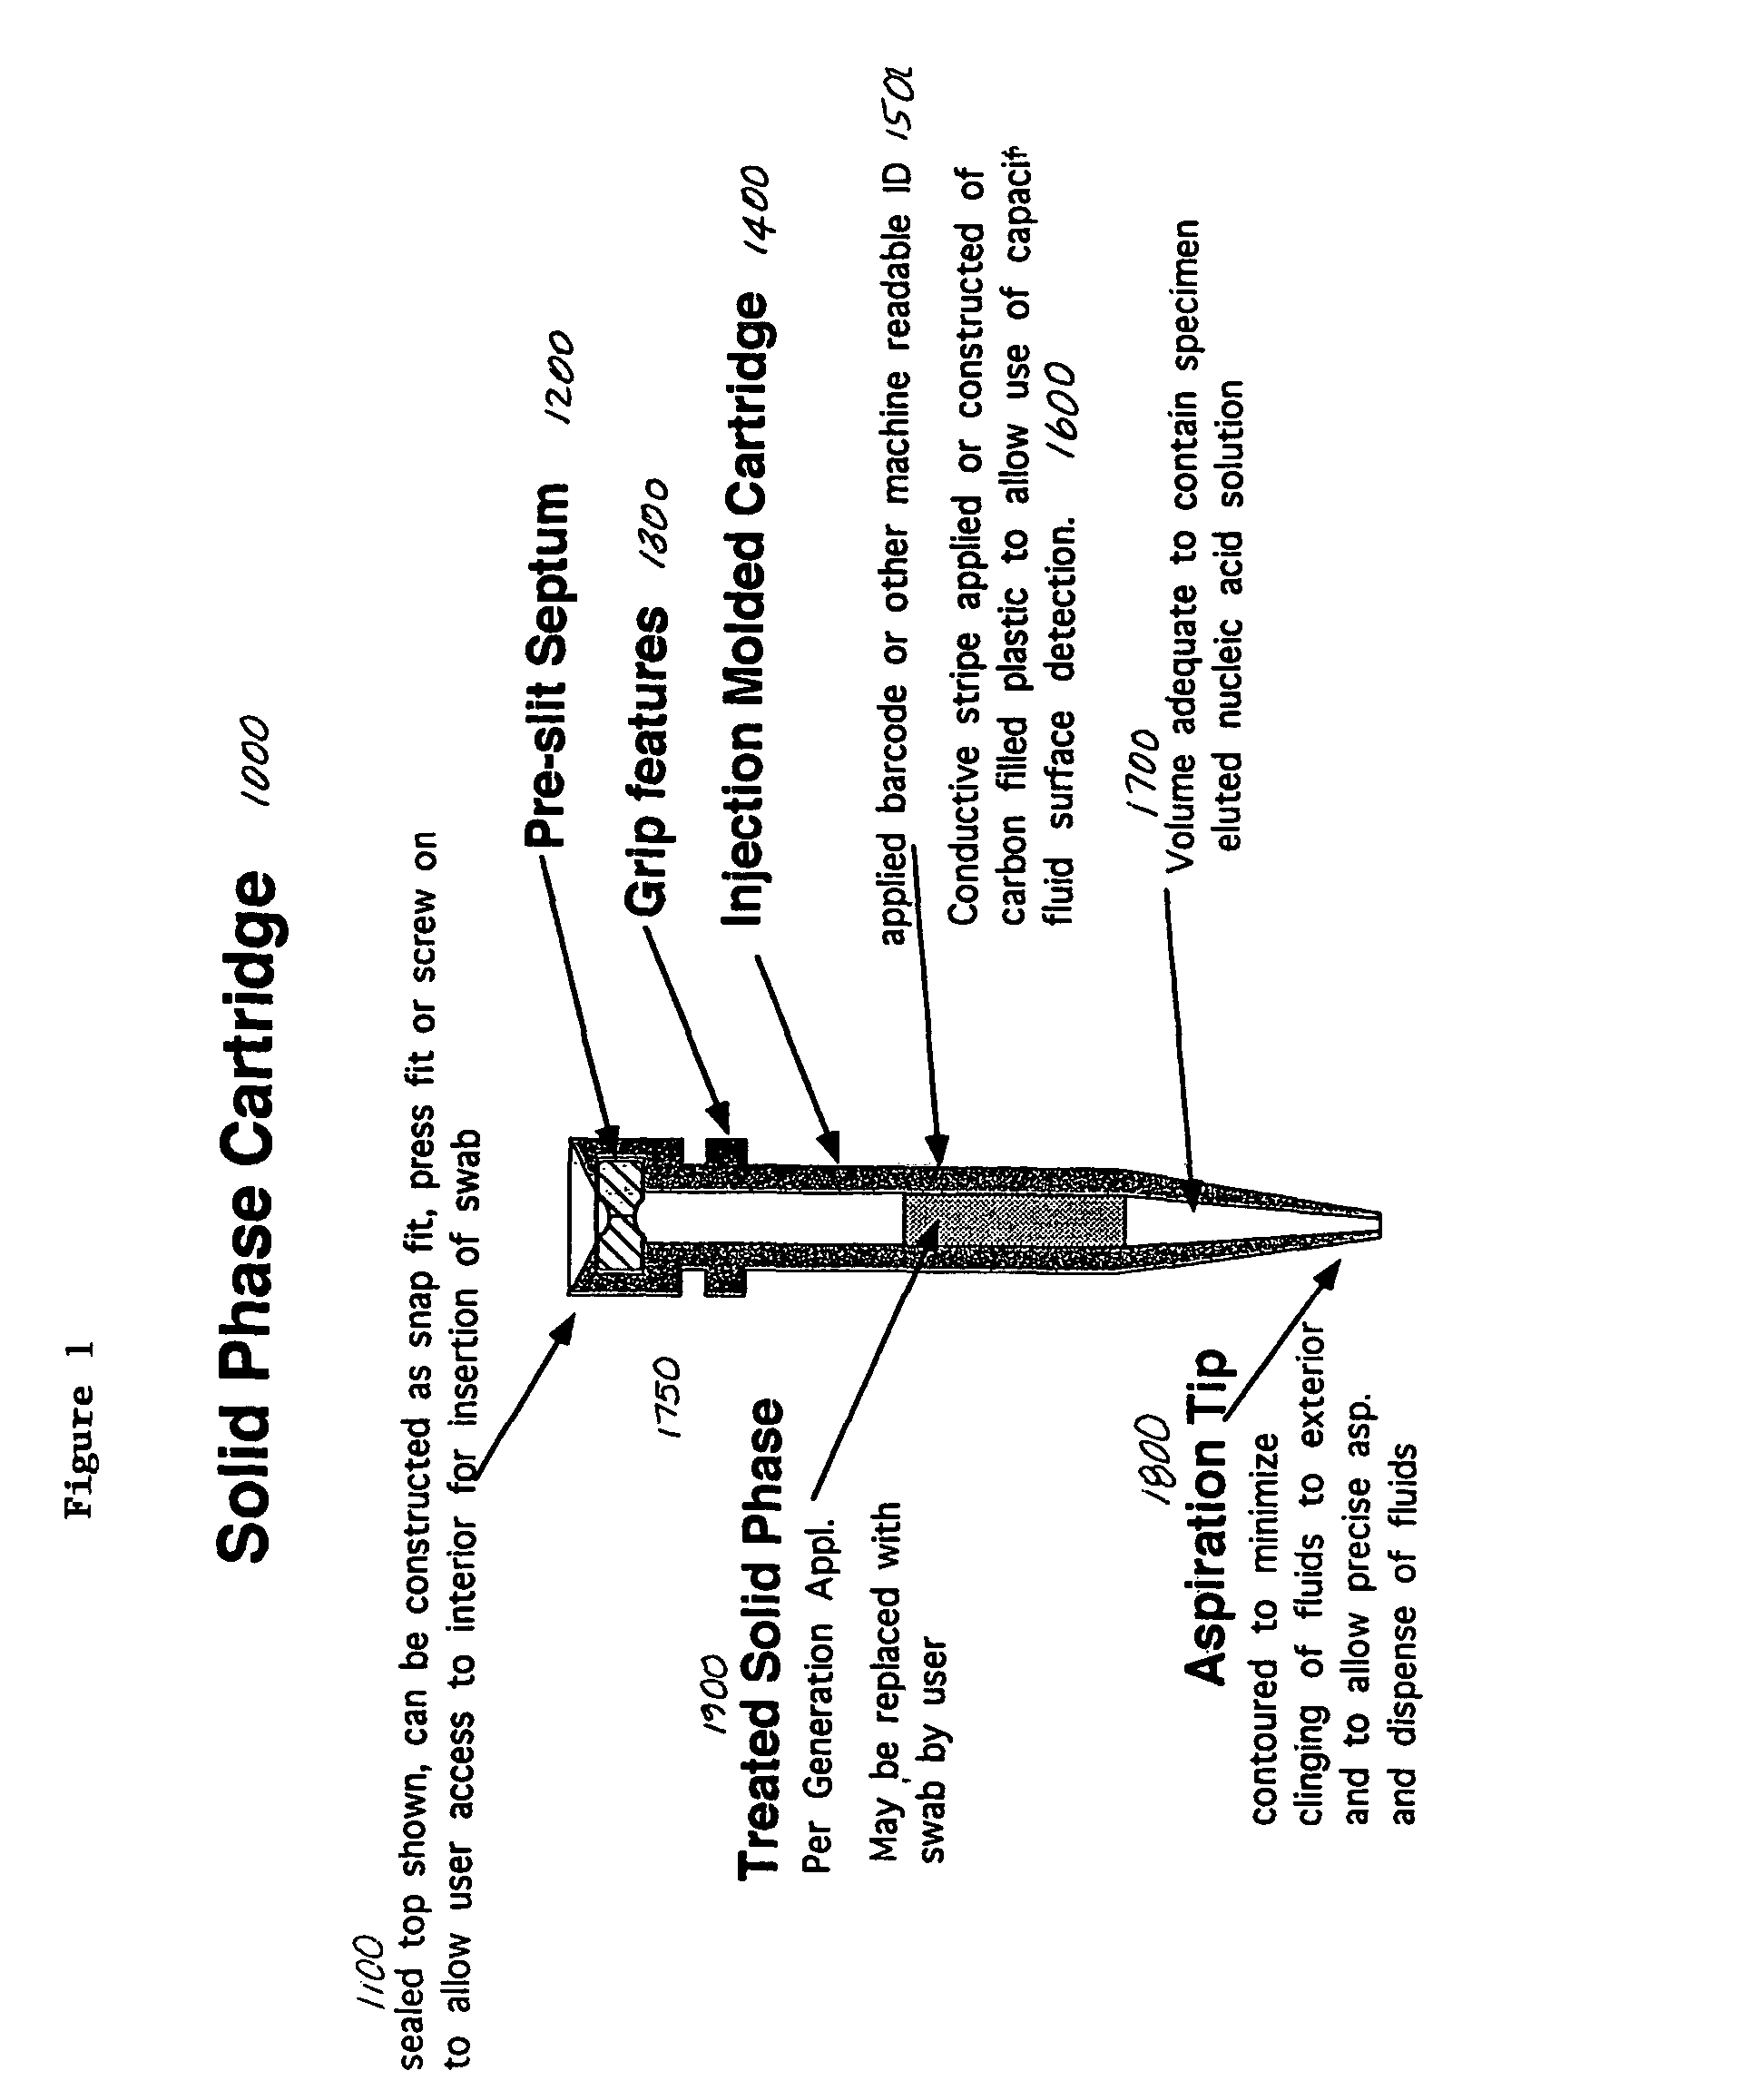 Apparatuses and methods for isolating nucleic acid